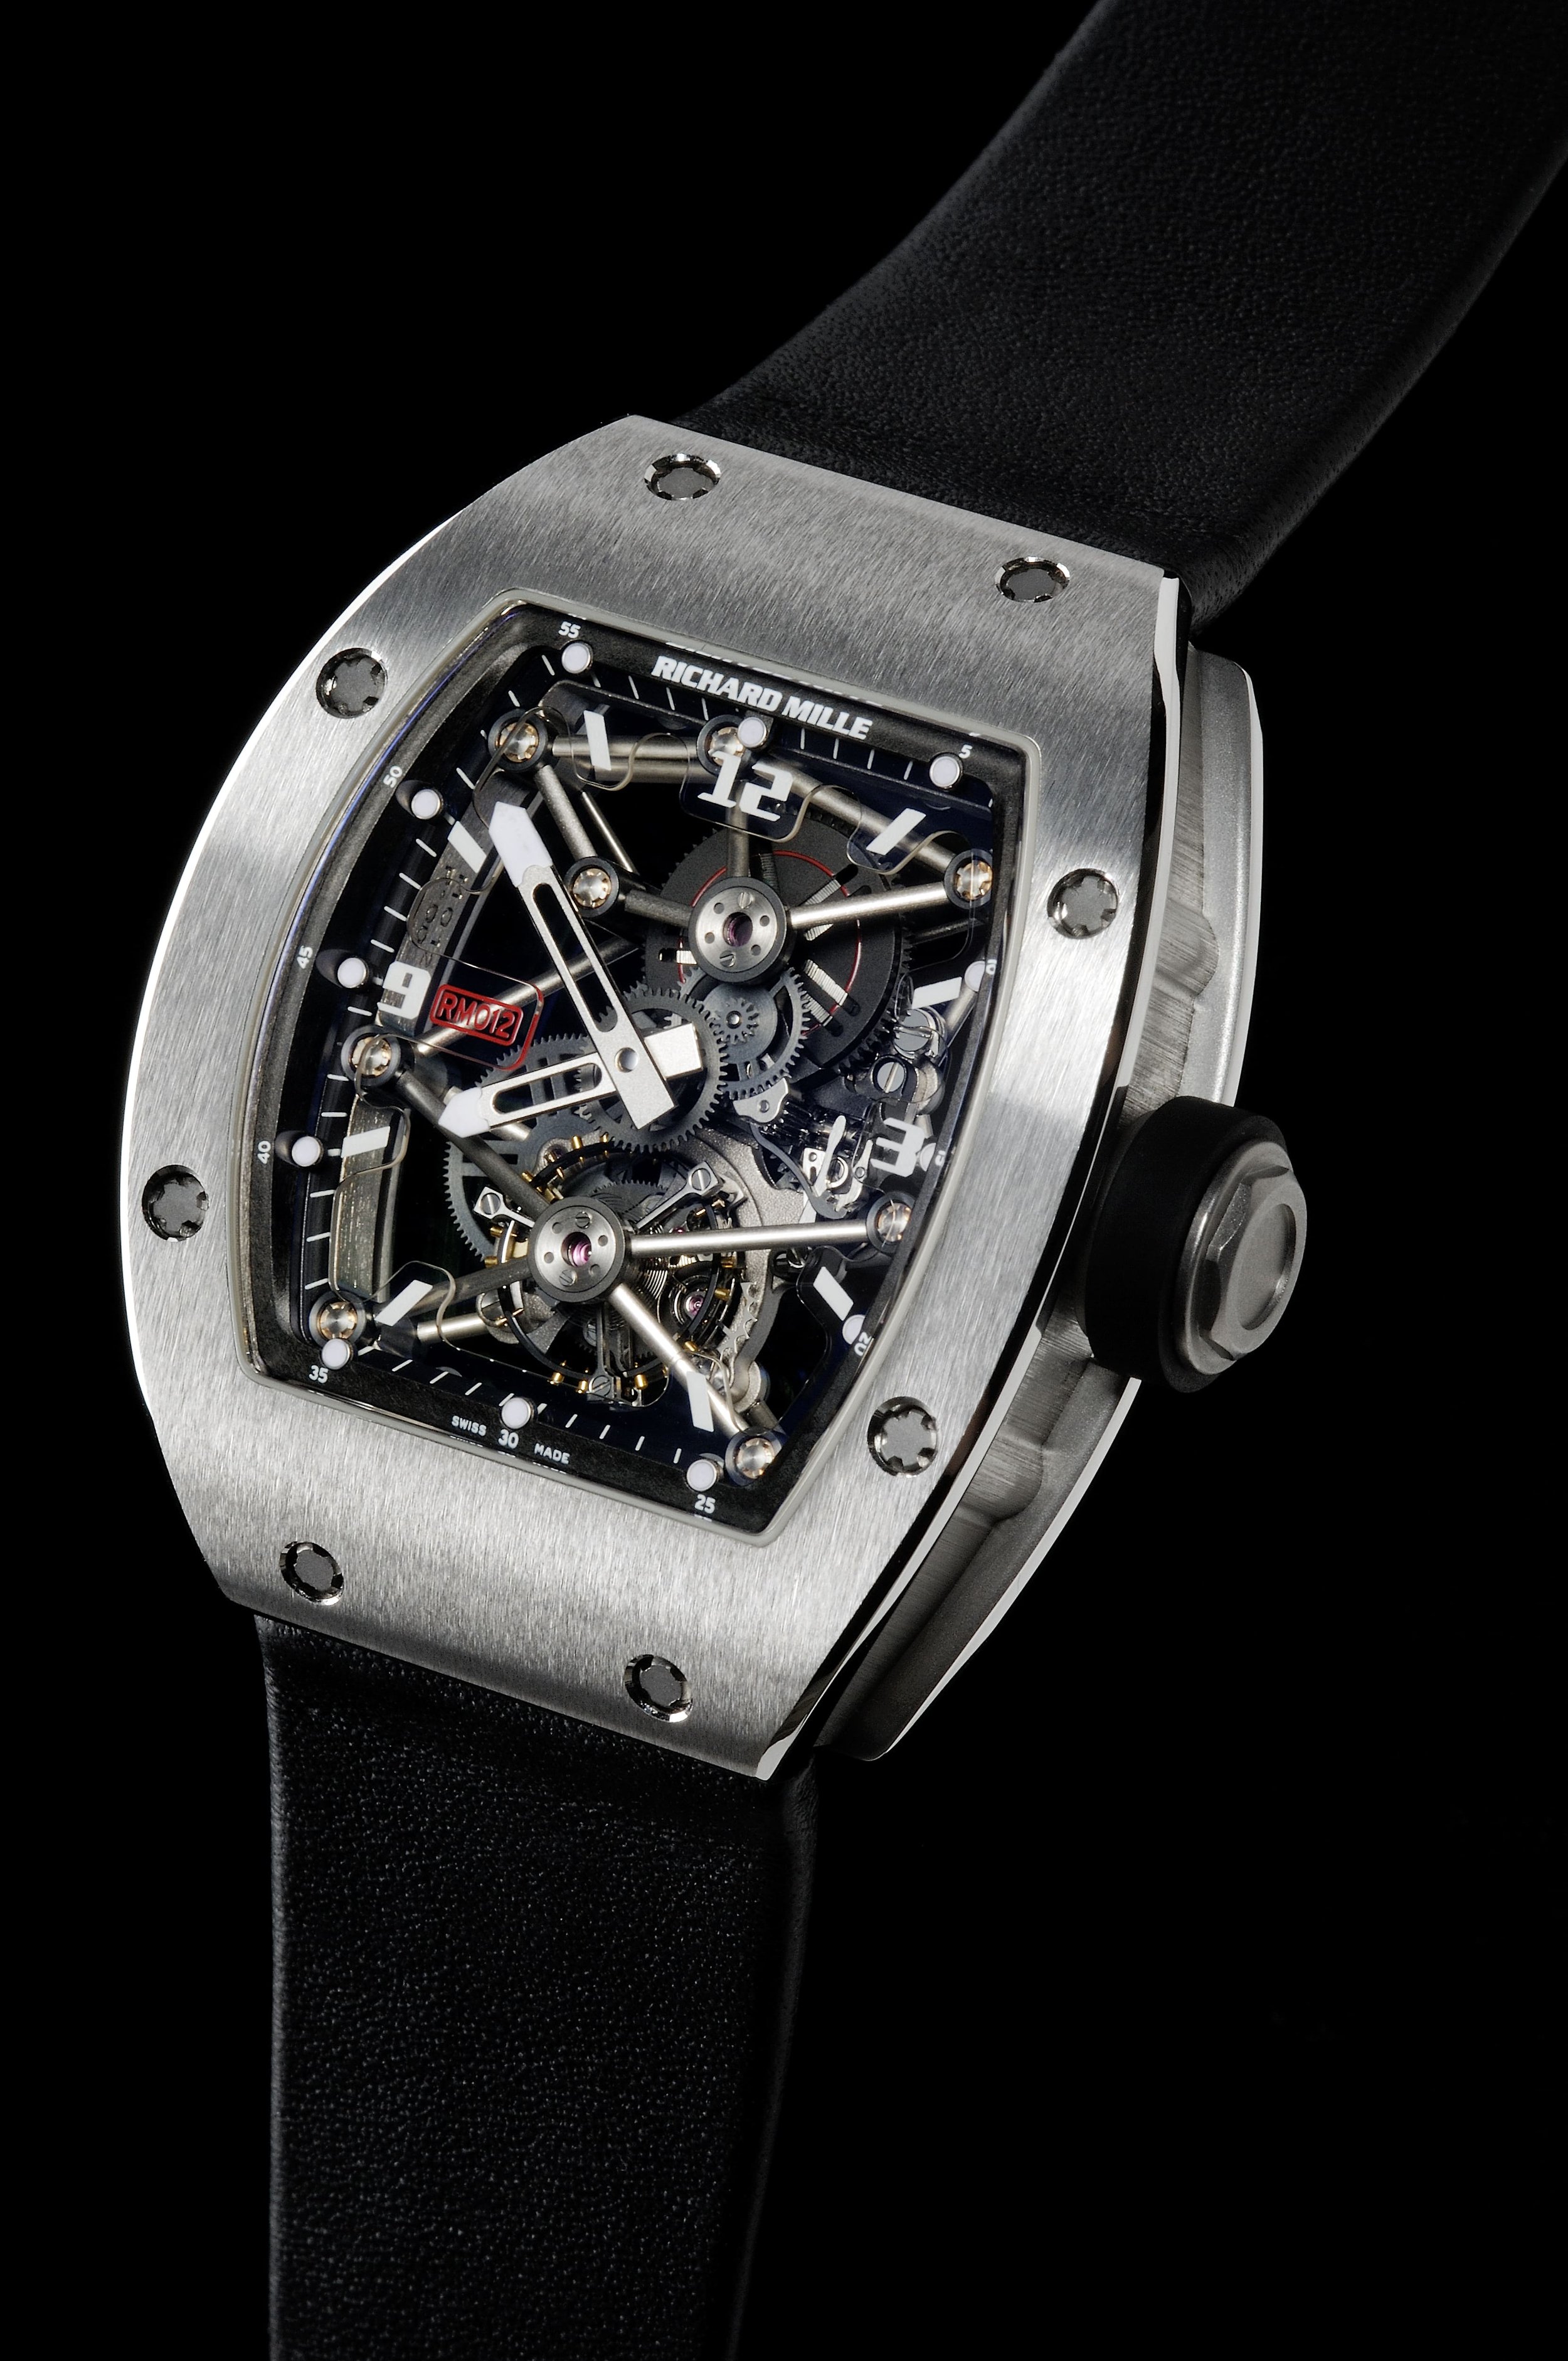 Exclusive interview with the Sales Director of Richard Mille: Alexandre ...